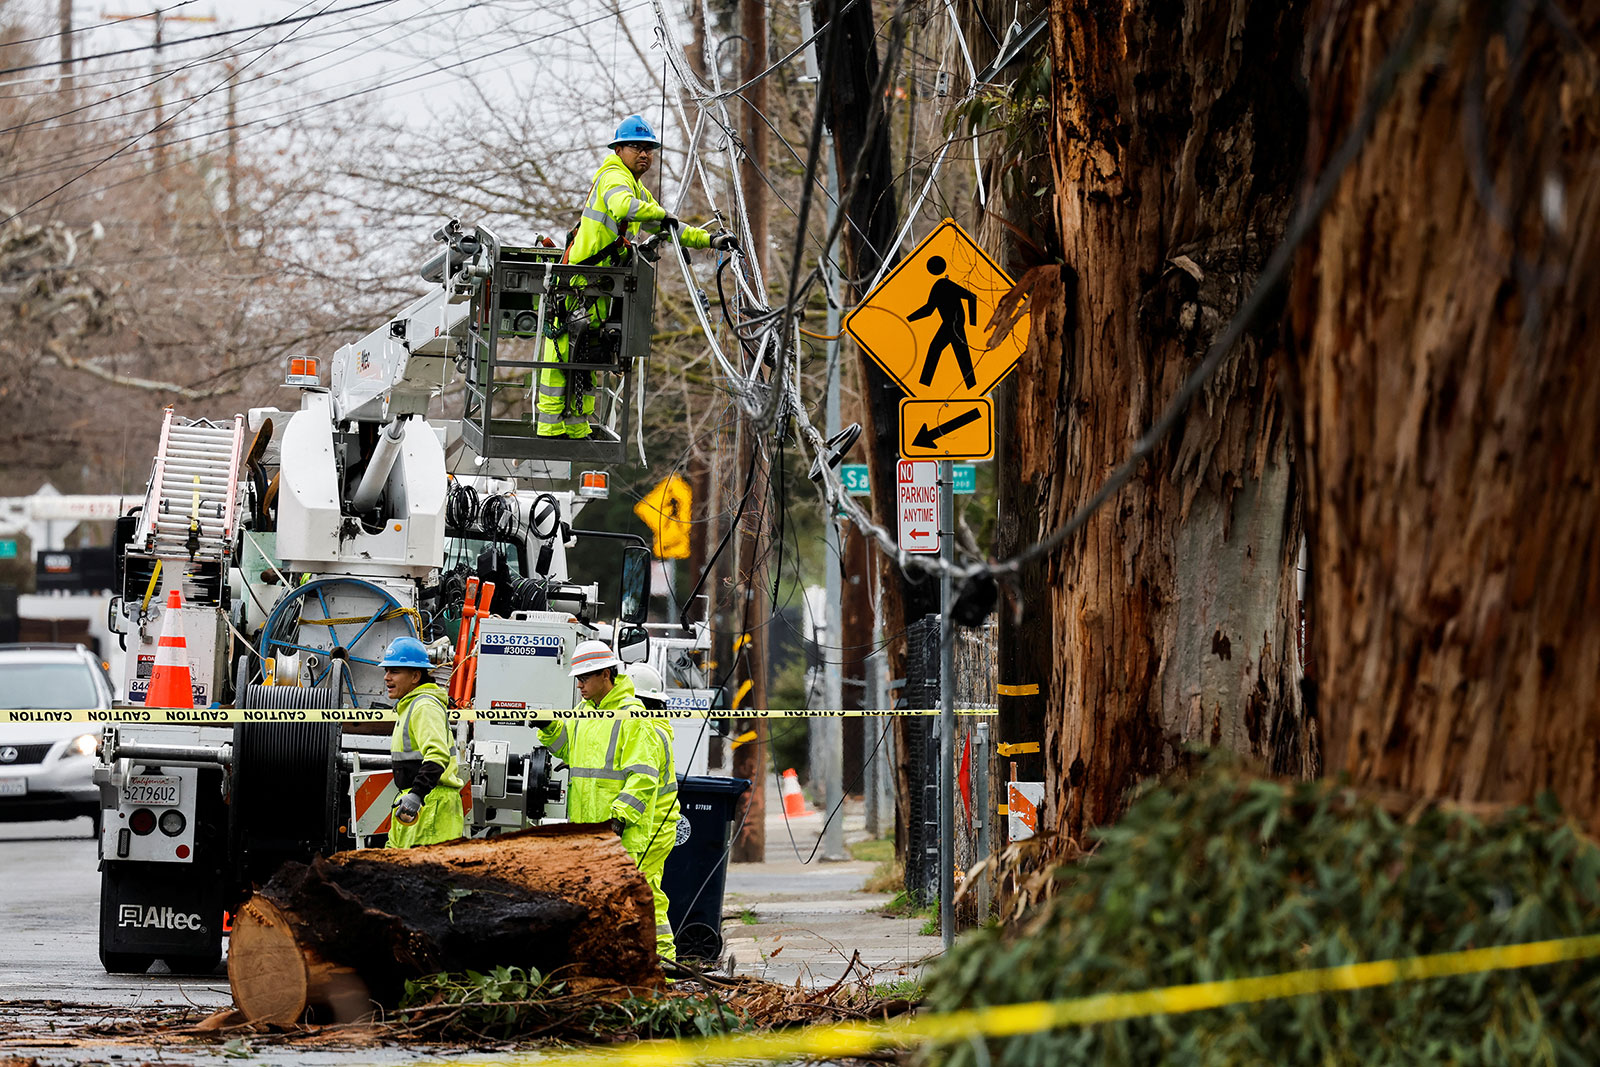 A Sacramento Municipal Utility District crew repairs downed power lines in Sacramento, California, on January 9.